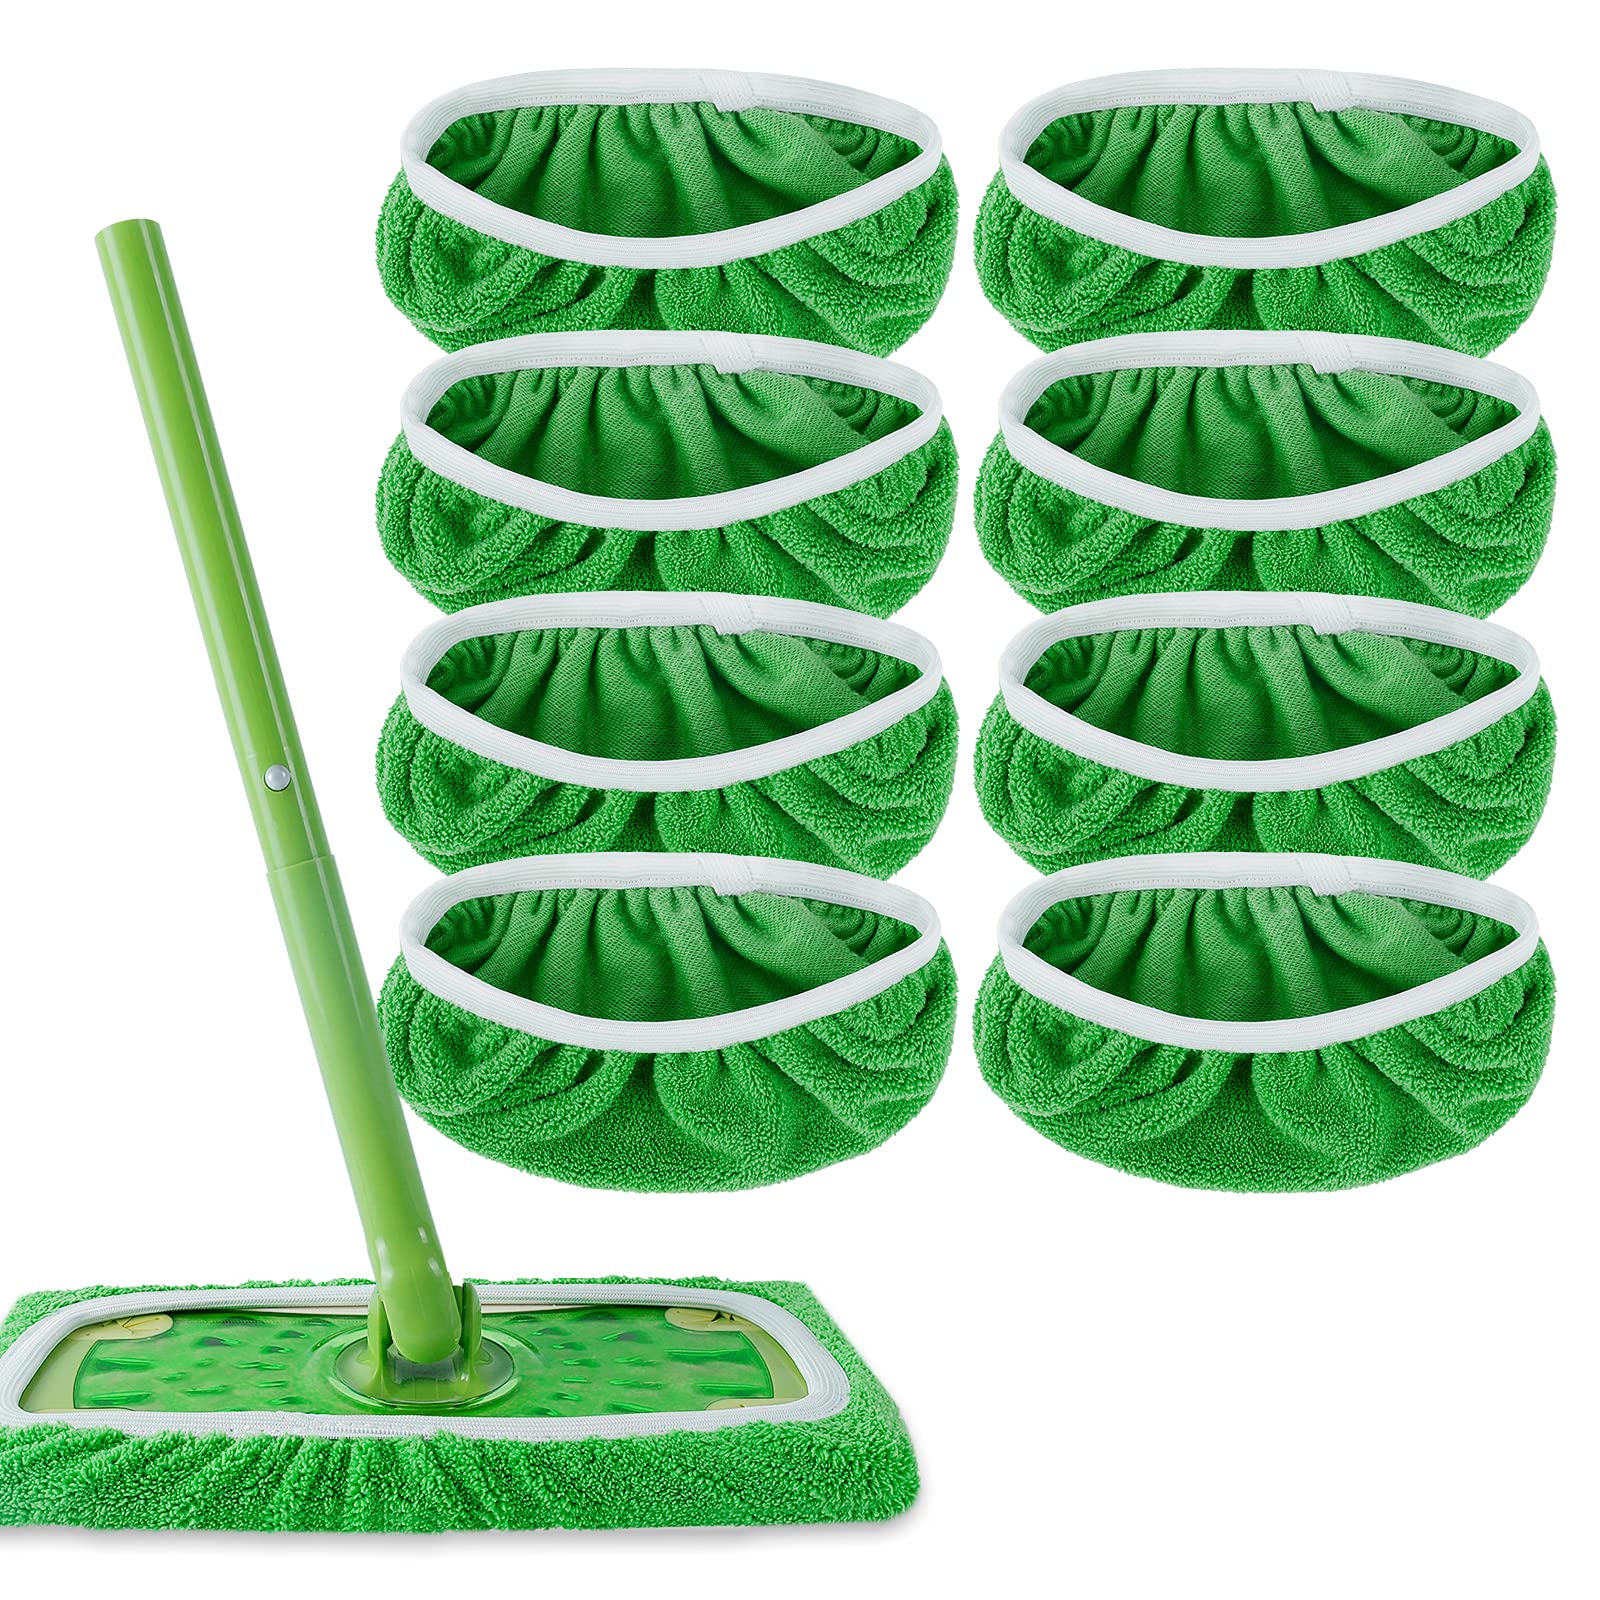 2 Pack Reusable Mop Pads Compatible with Swiffer WetJet,Microfiber Mop Pads  Replacement Fits Swiffer Wet Jet Washable Mop Pads Cloths Refills for